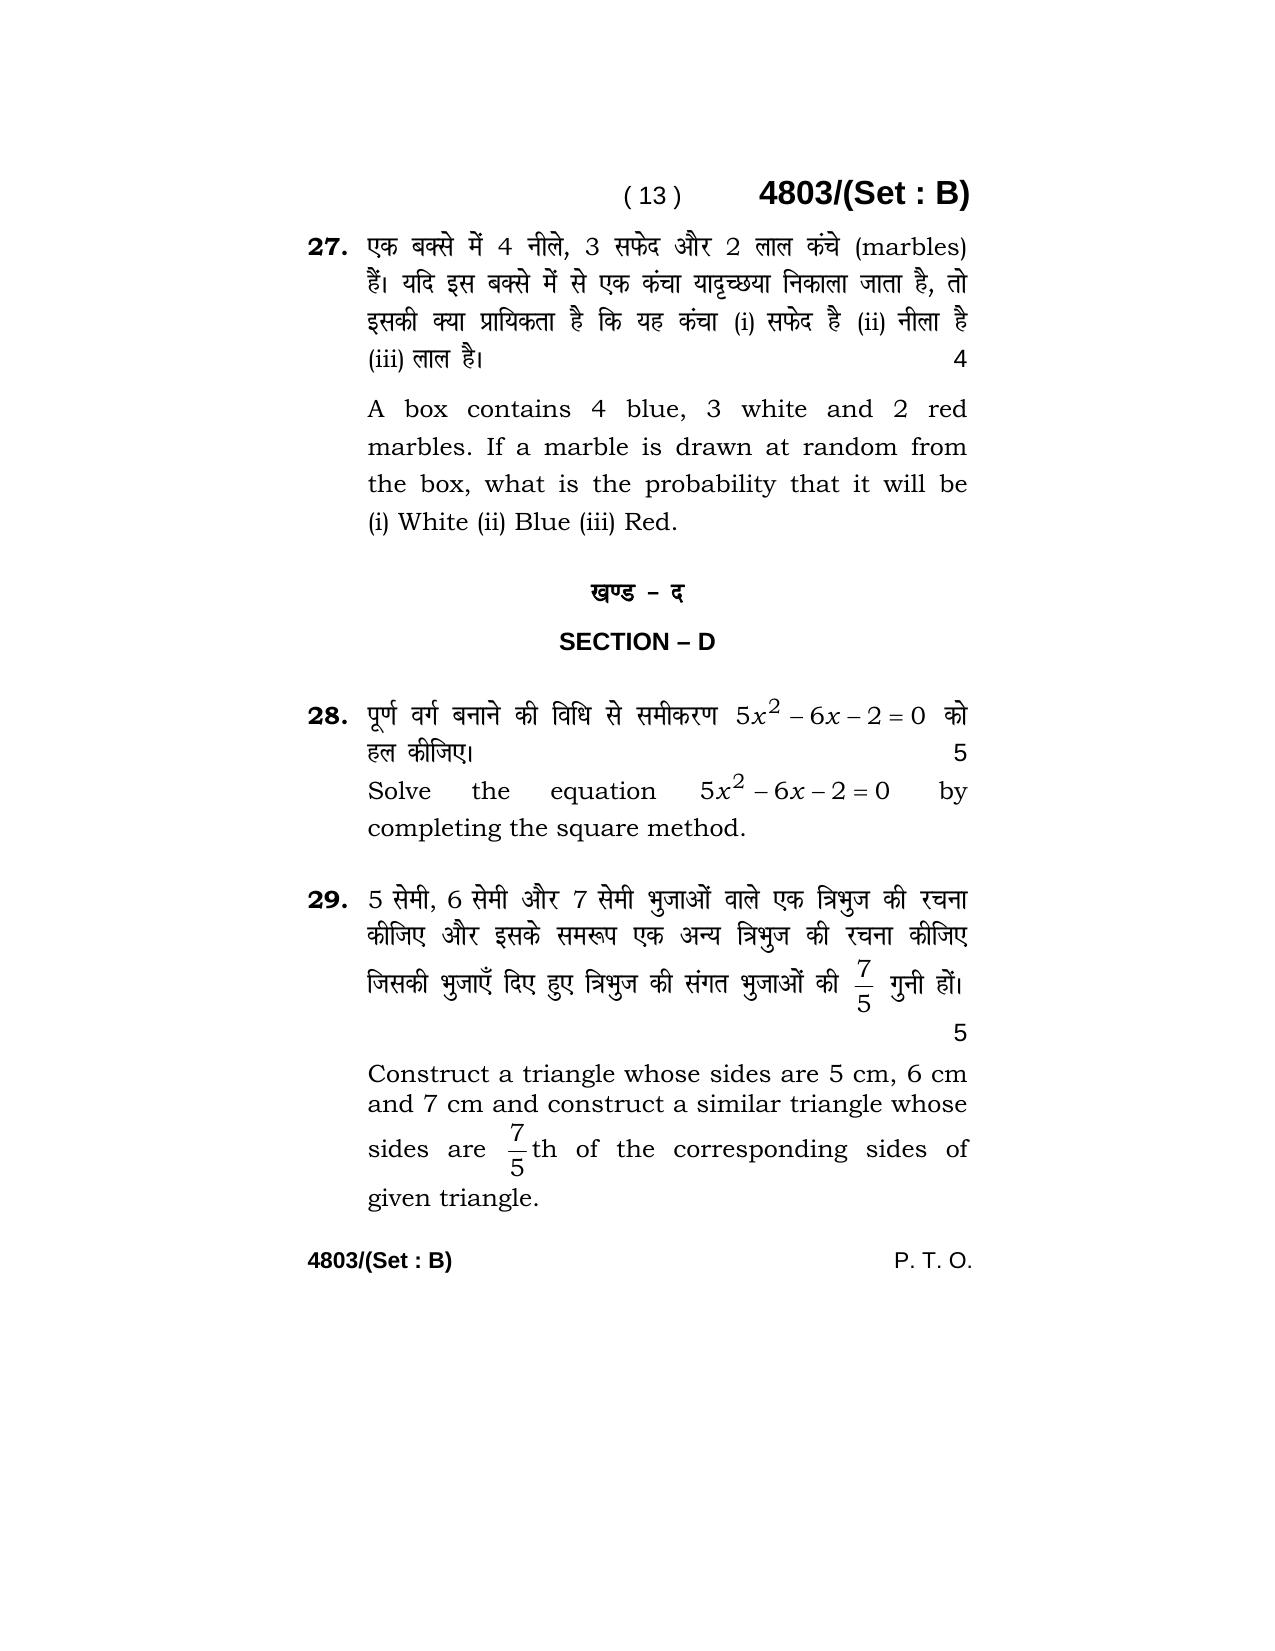 Haryana Board HBSE Class 10 Mathematics 2020 Question Paper - Page 29